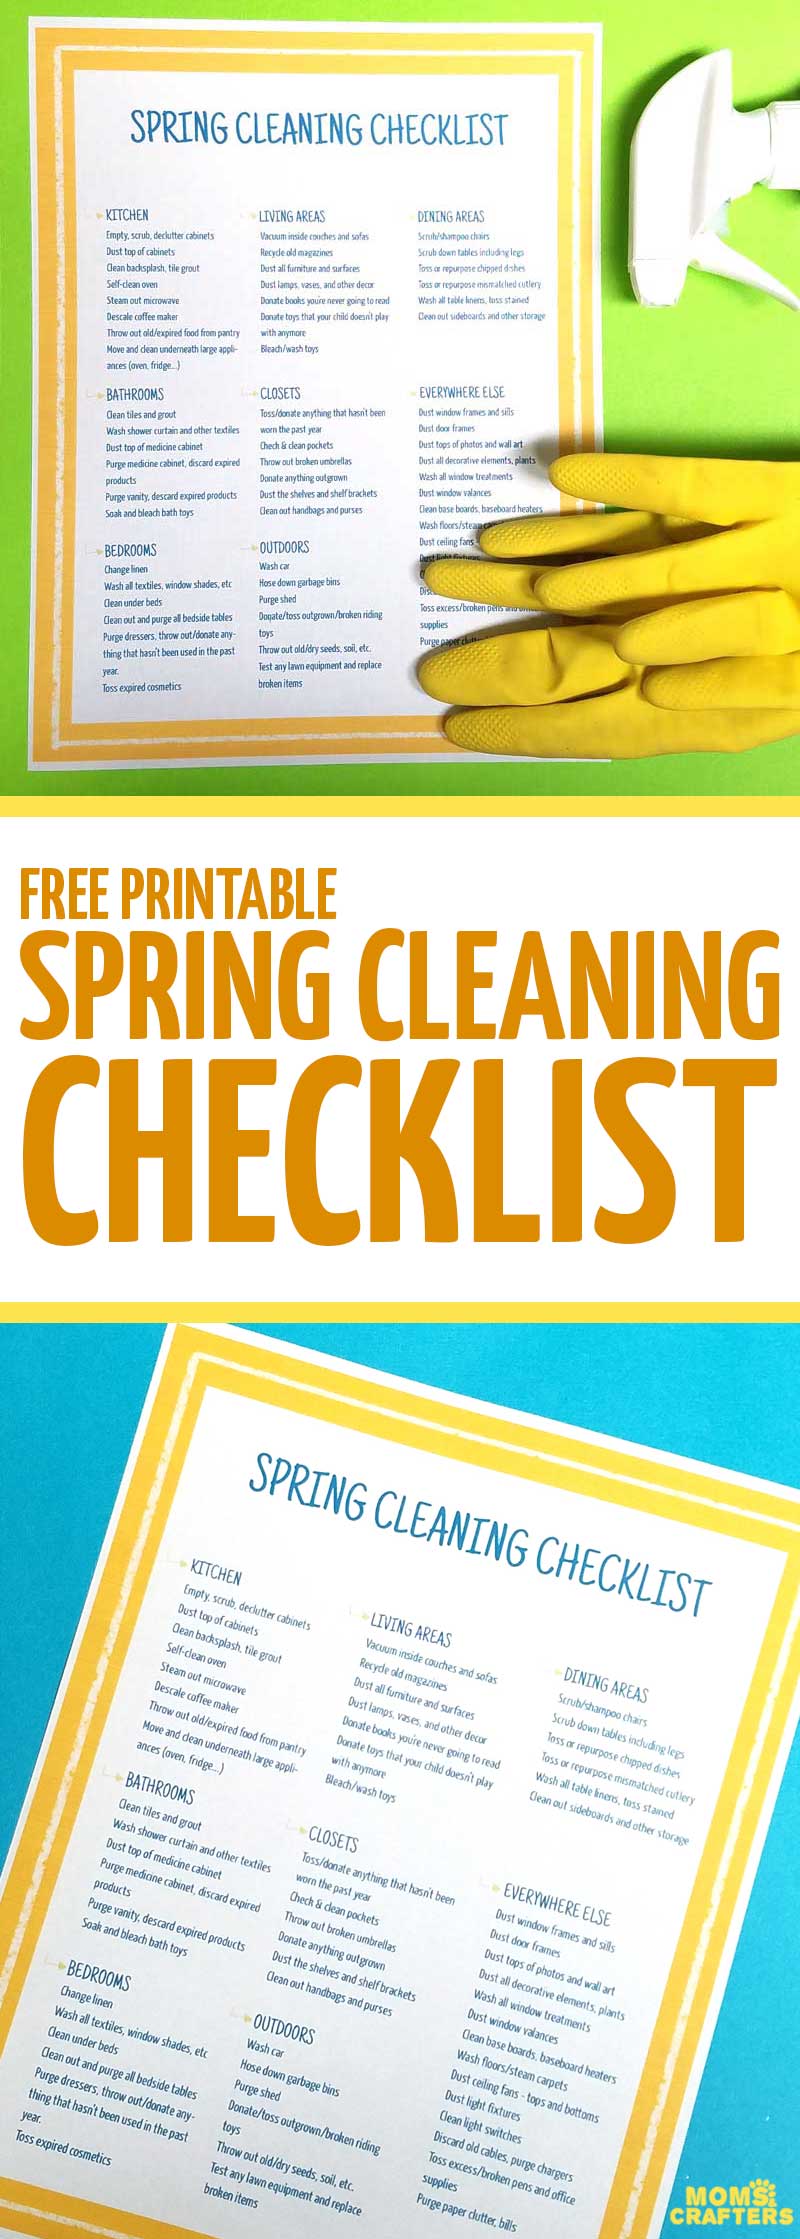 Spring Cleaning Hacks with Free Printables